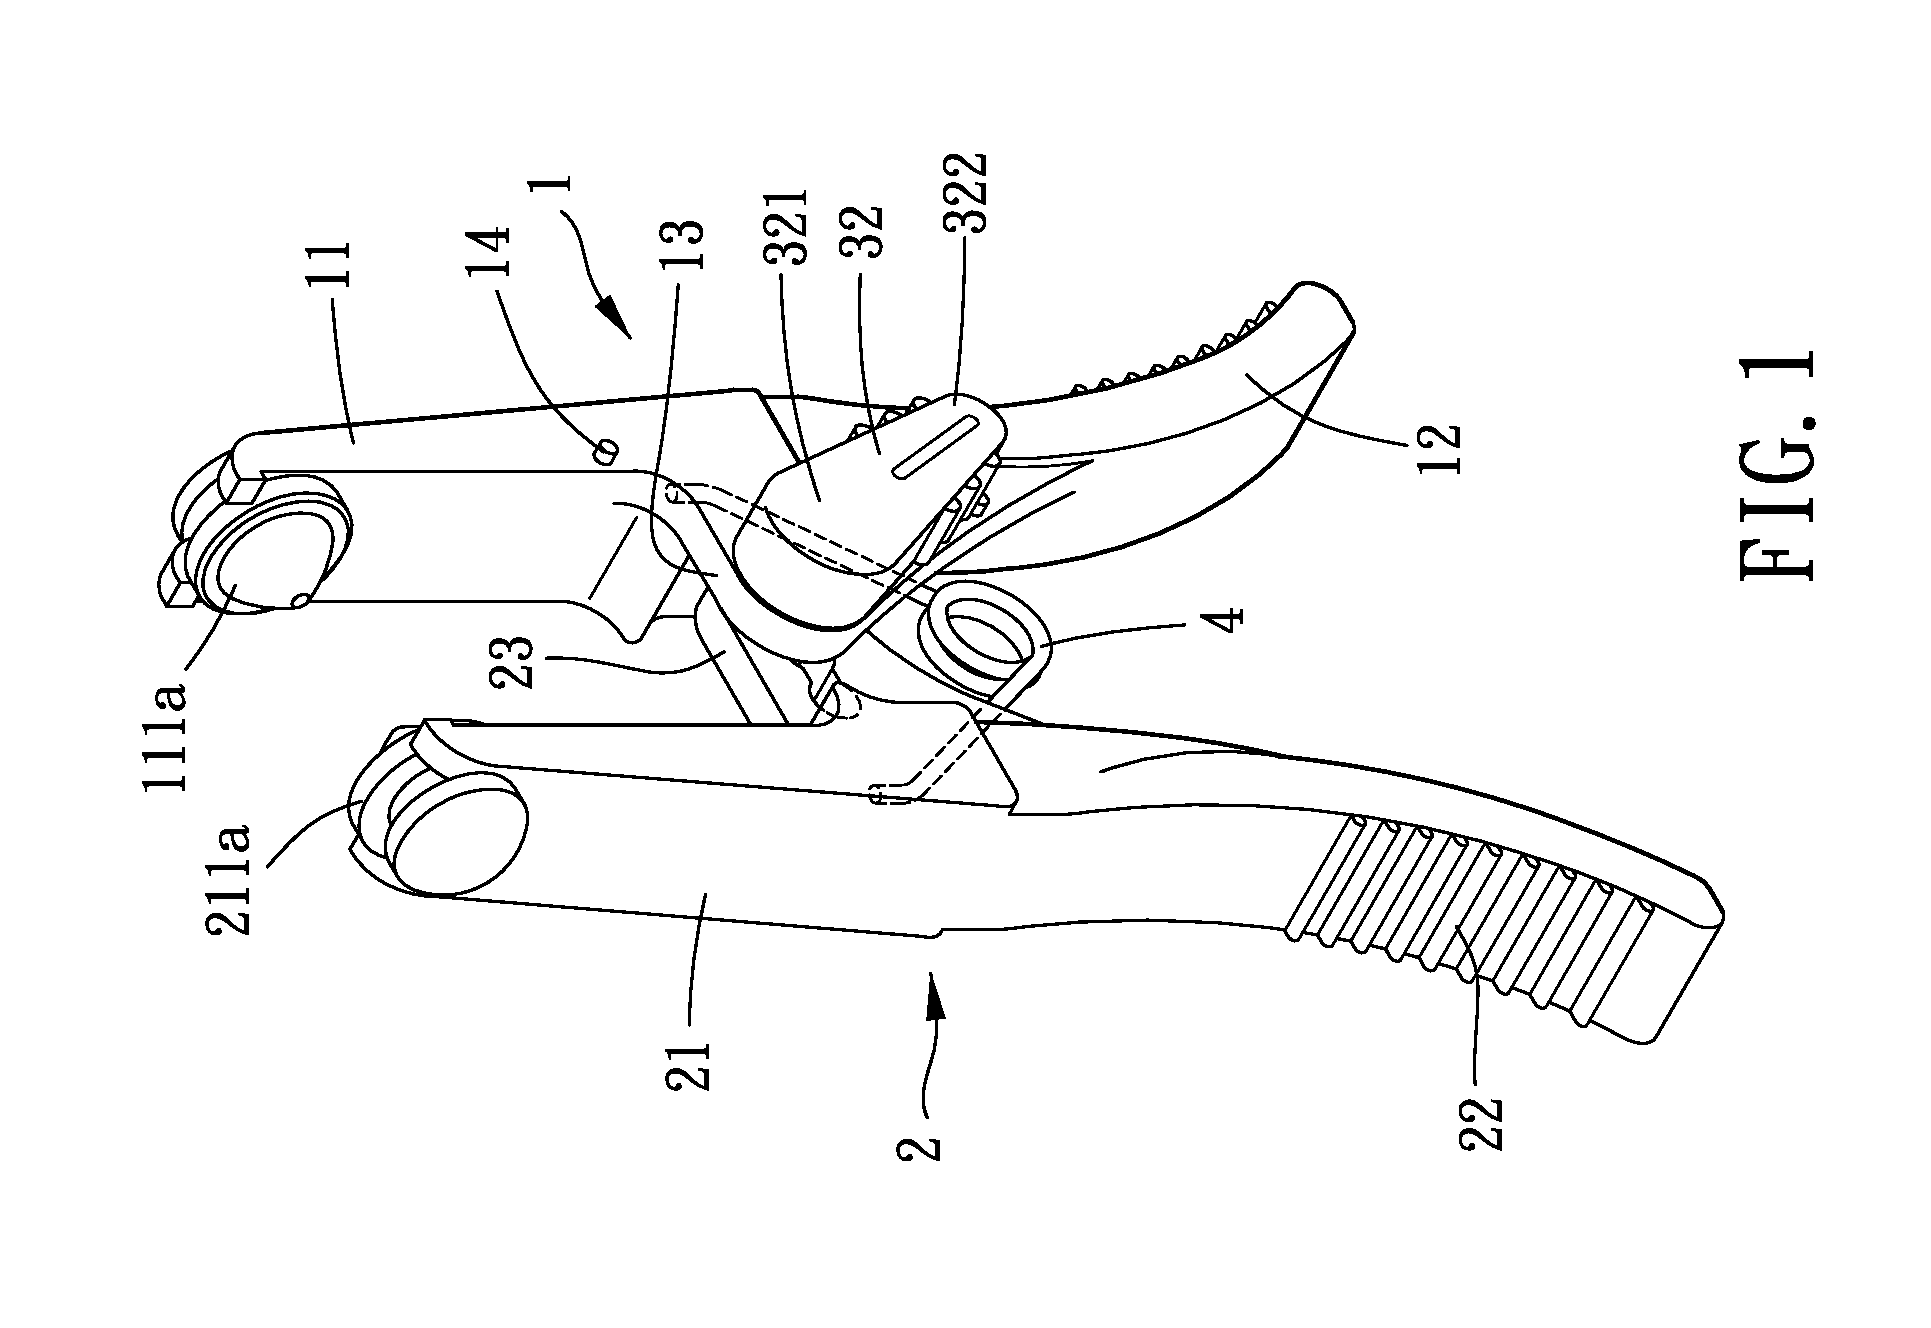 Adjustable clamping device